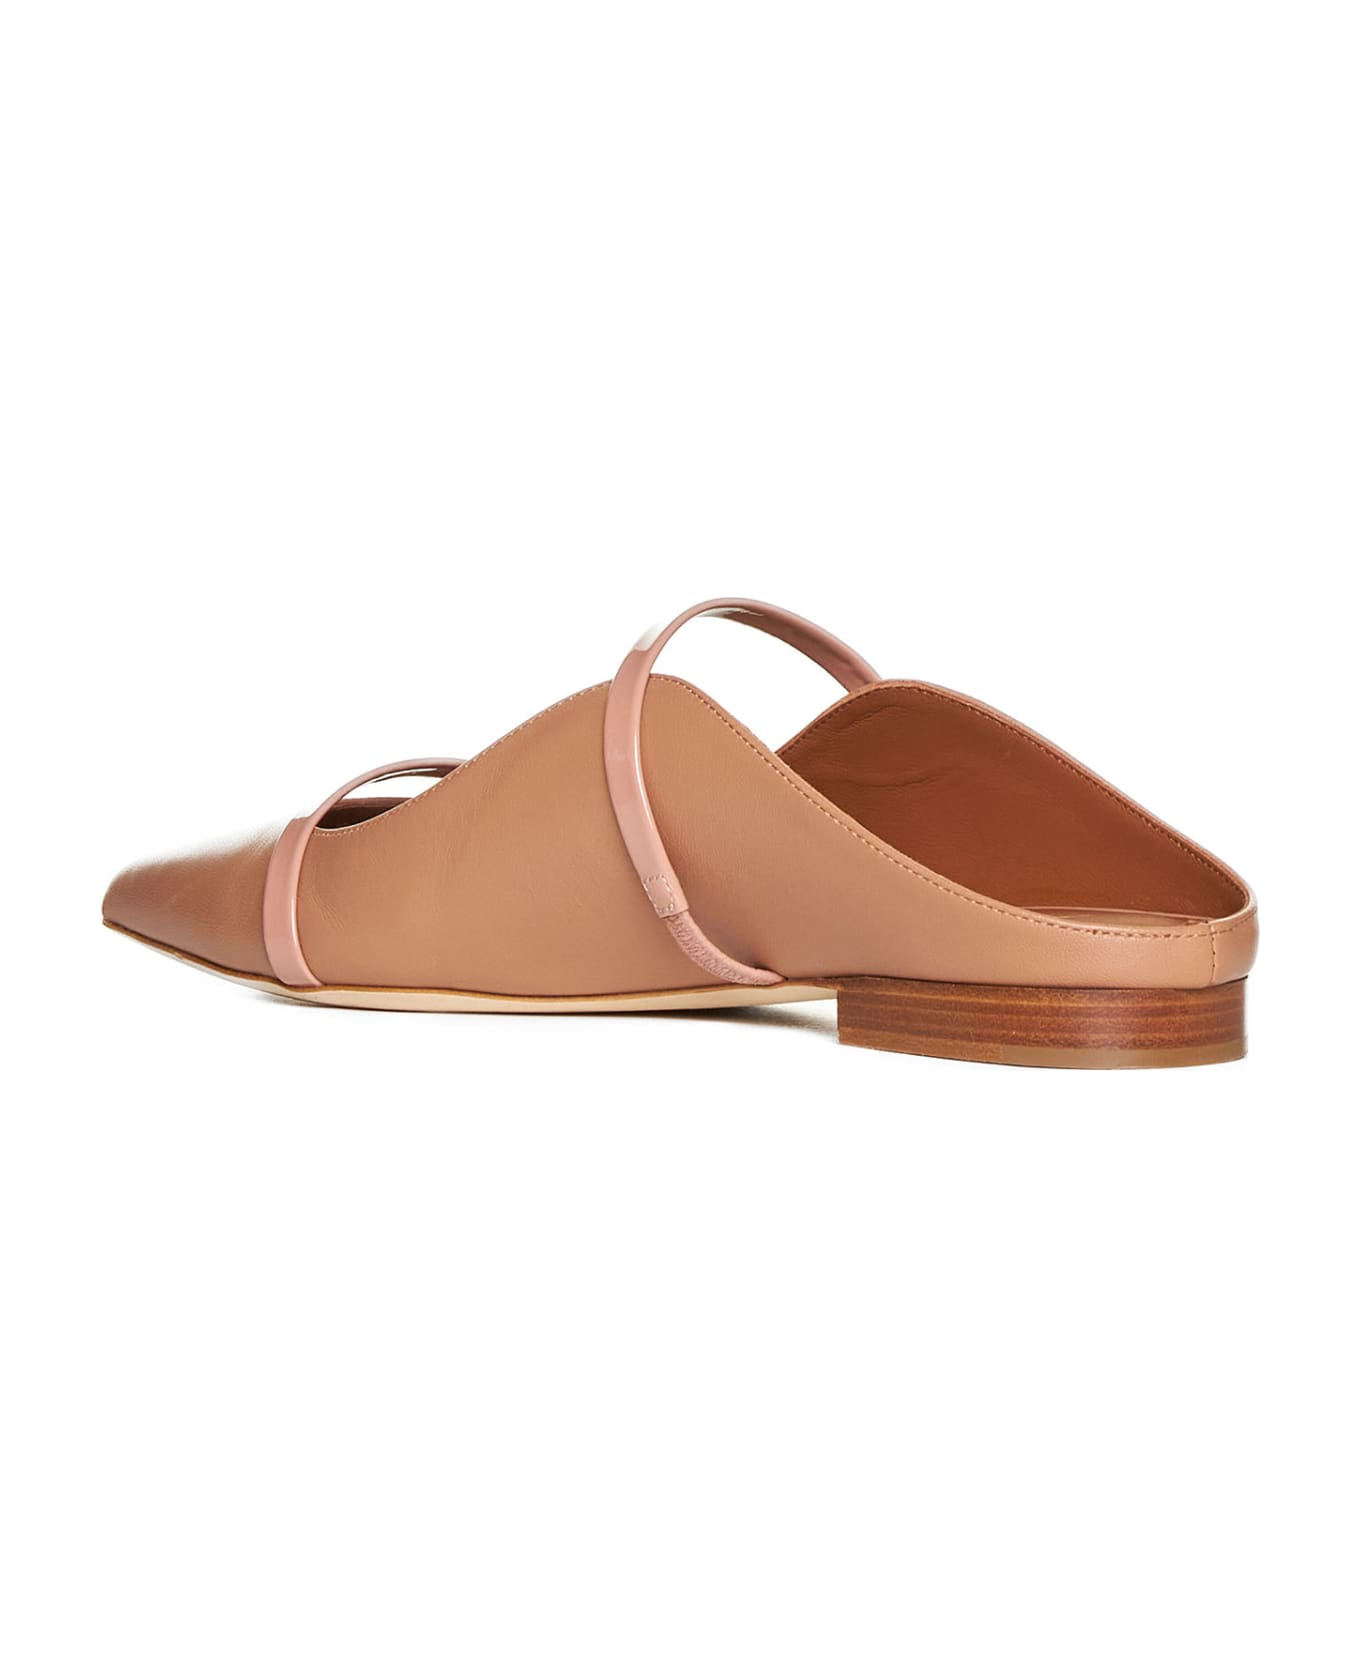 Malone Souliers Sandals - Nude/blush